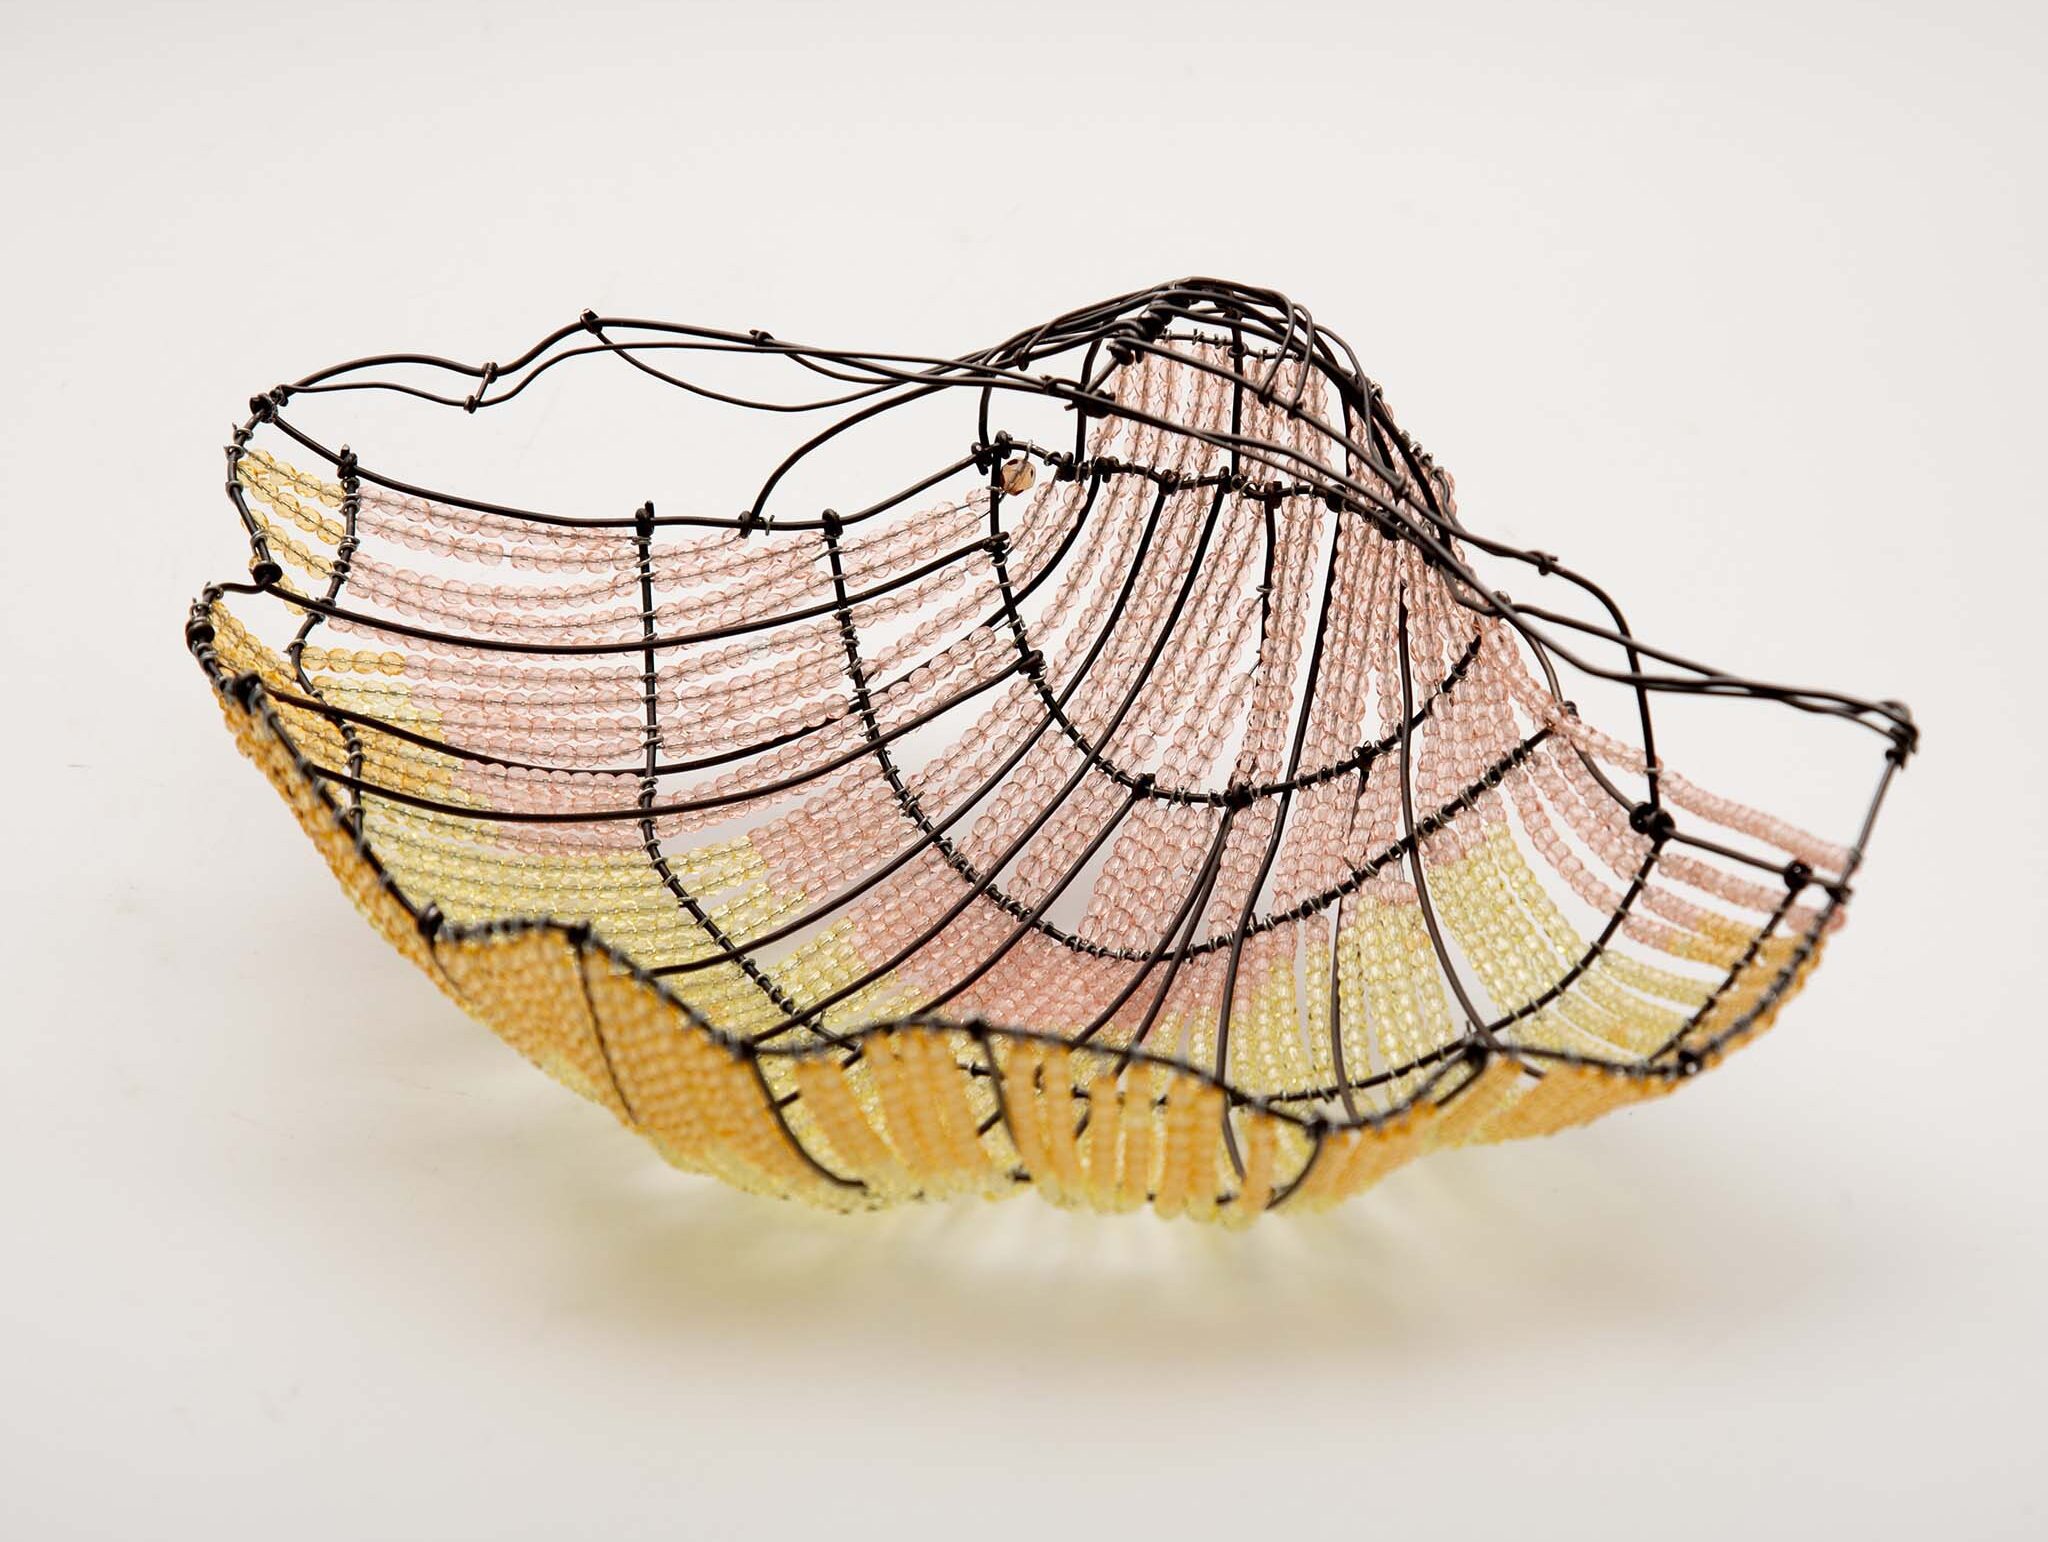 Mounted Clam Sculpture by Marie Christophe